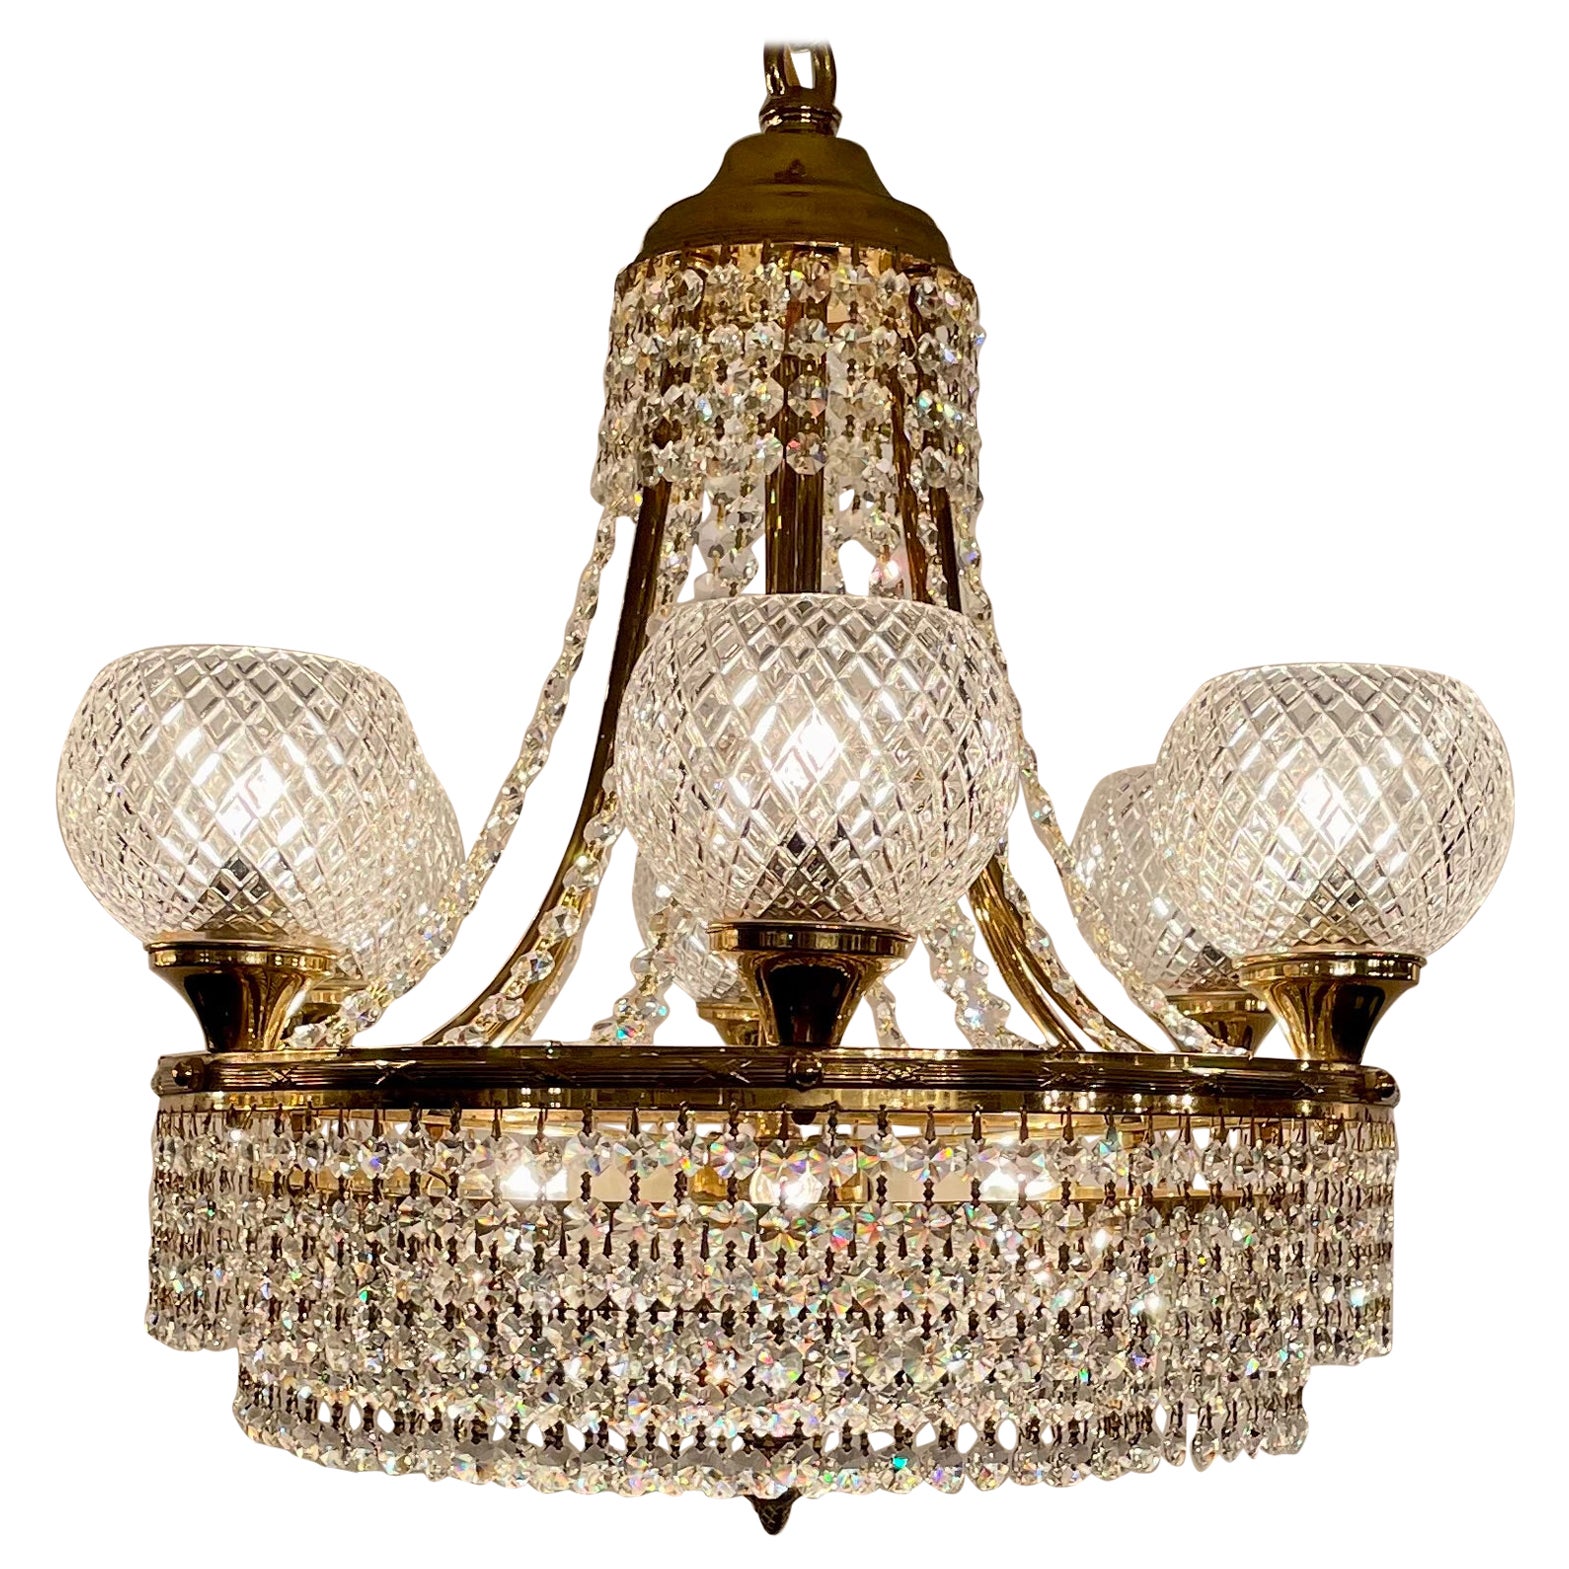 Antique Art Deco Cut Crystal and Gold Bronze Chandelier, Circa 1940.